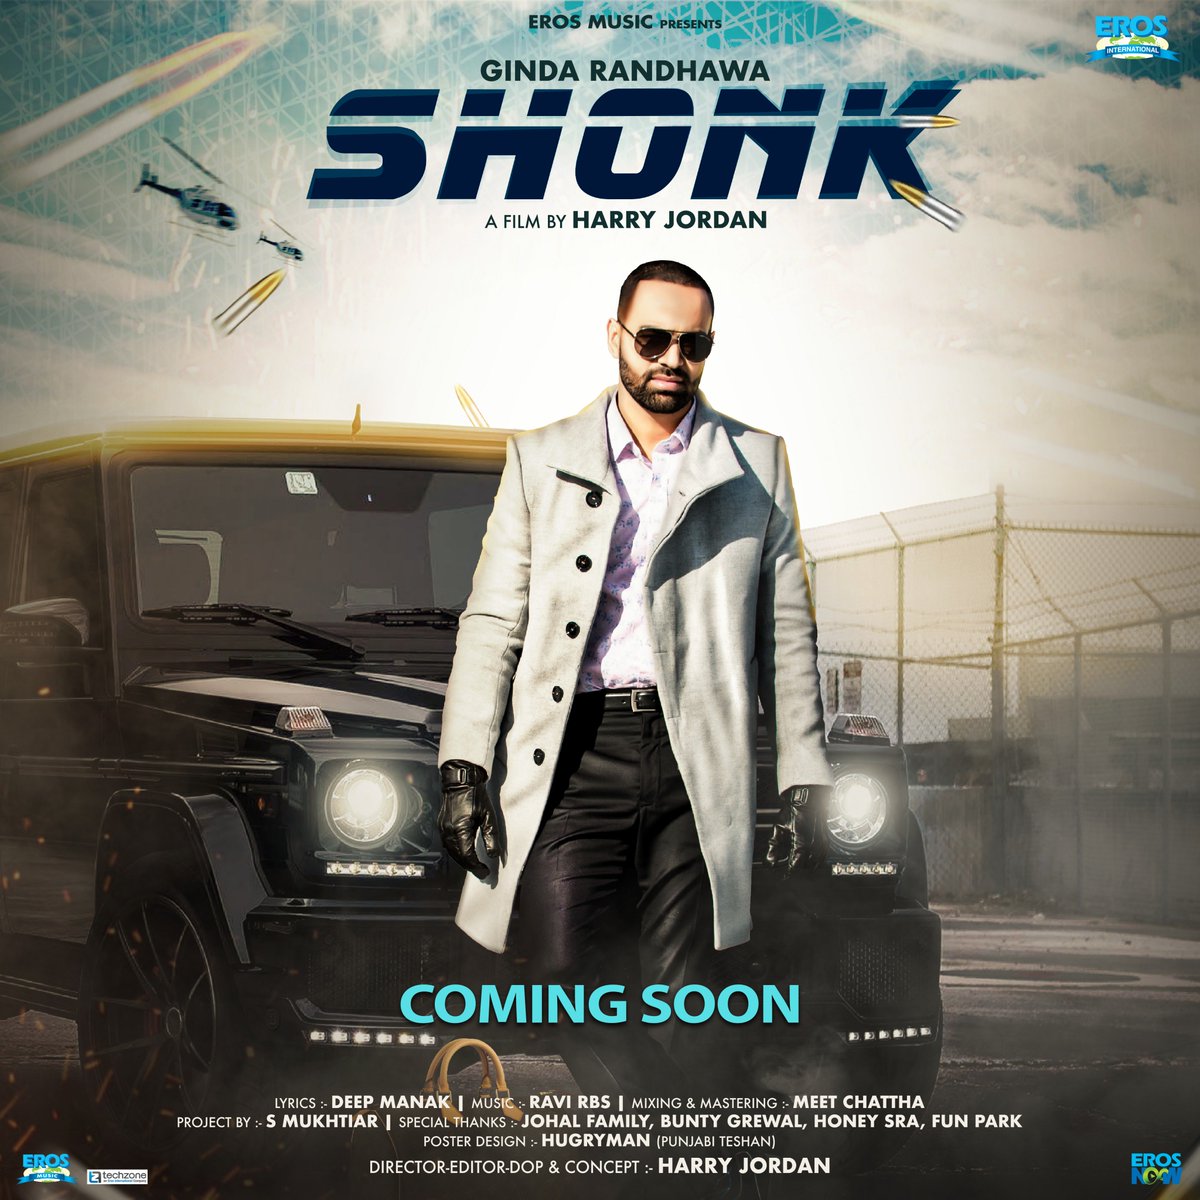 Here's the official poster of our upcoming song 'Shonk'. Song coming soon! 😎

#Shonk | #ErosMusic | @krishikalulla | #GindaRandhawa | #DeepManak | #RBSProductions | #HarryJordan | #SMukhtair